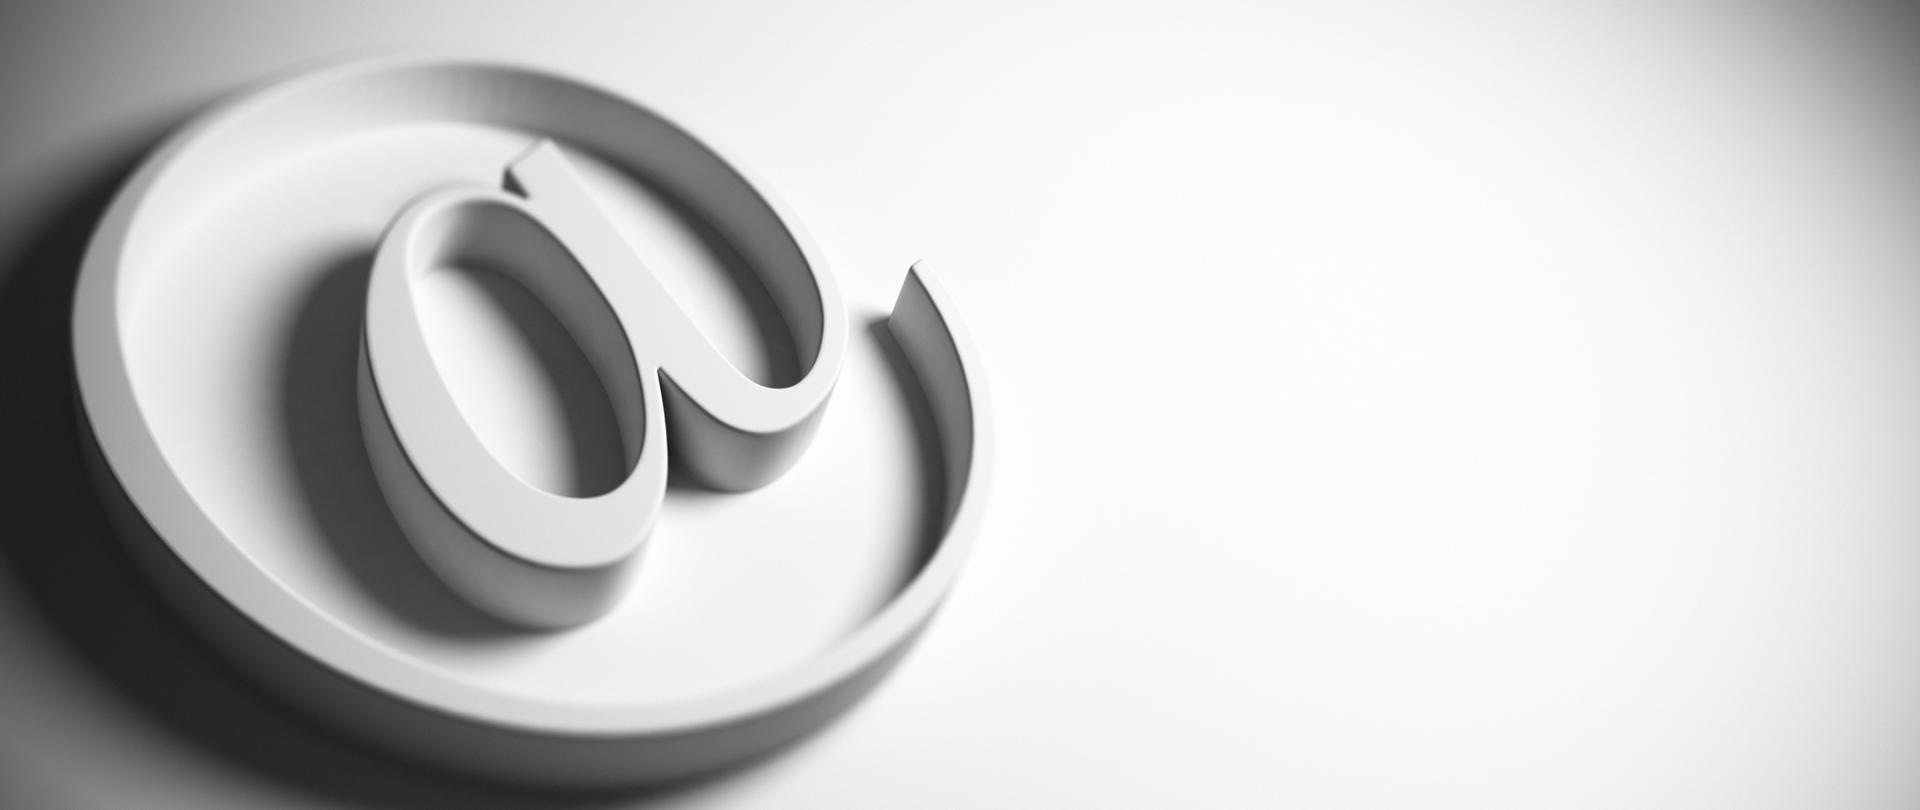 email symbol, at sign, grey background, panoramic image blur effect and copy space on the right, 3D render